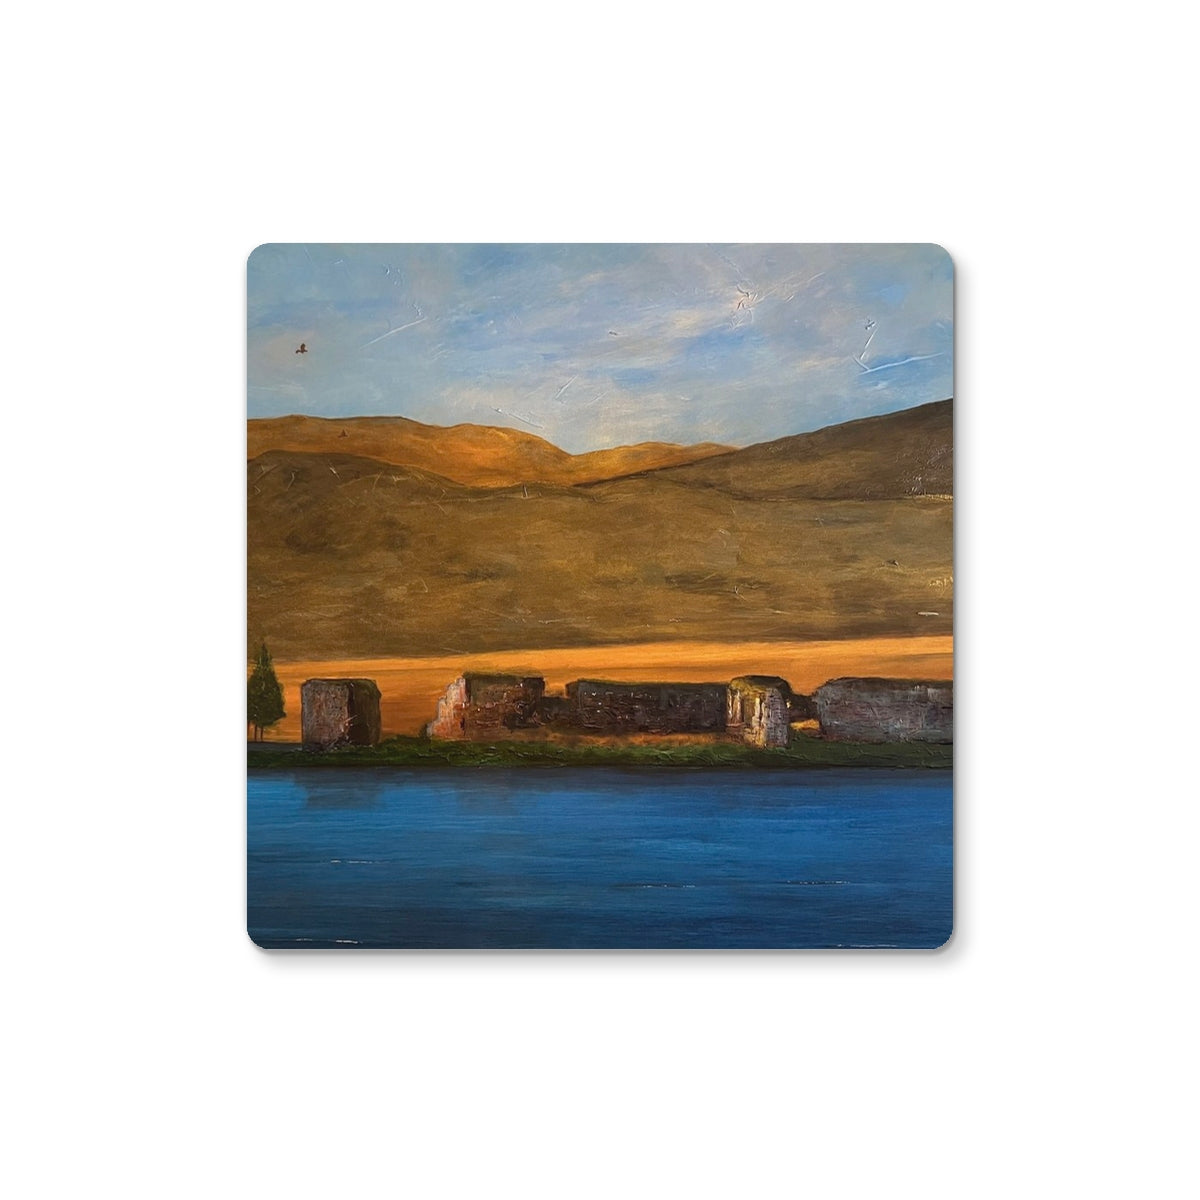 Lochindorb Castle Art Gifts Coaster-Coasters-Scottish Lochs & Mountains Art Gallery-4 Coasters-Paintings, Prints, Homeware, Art Gifts From Scotland By Scottish Artist Kevin Hunter